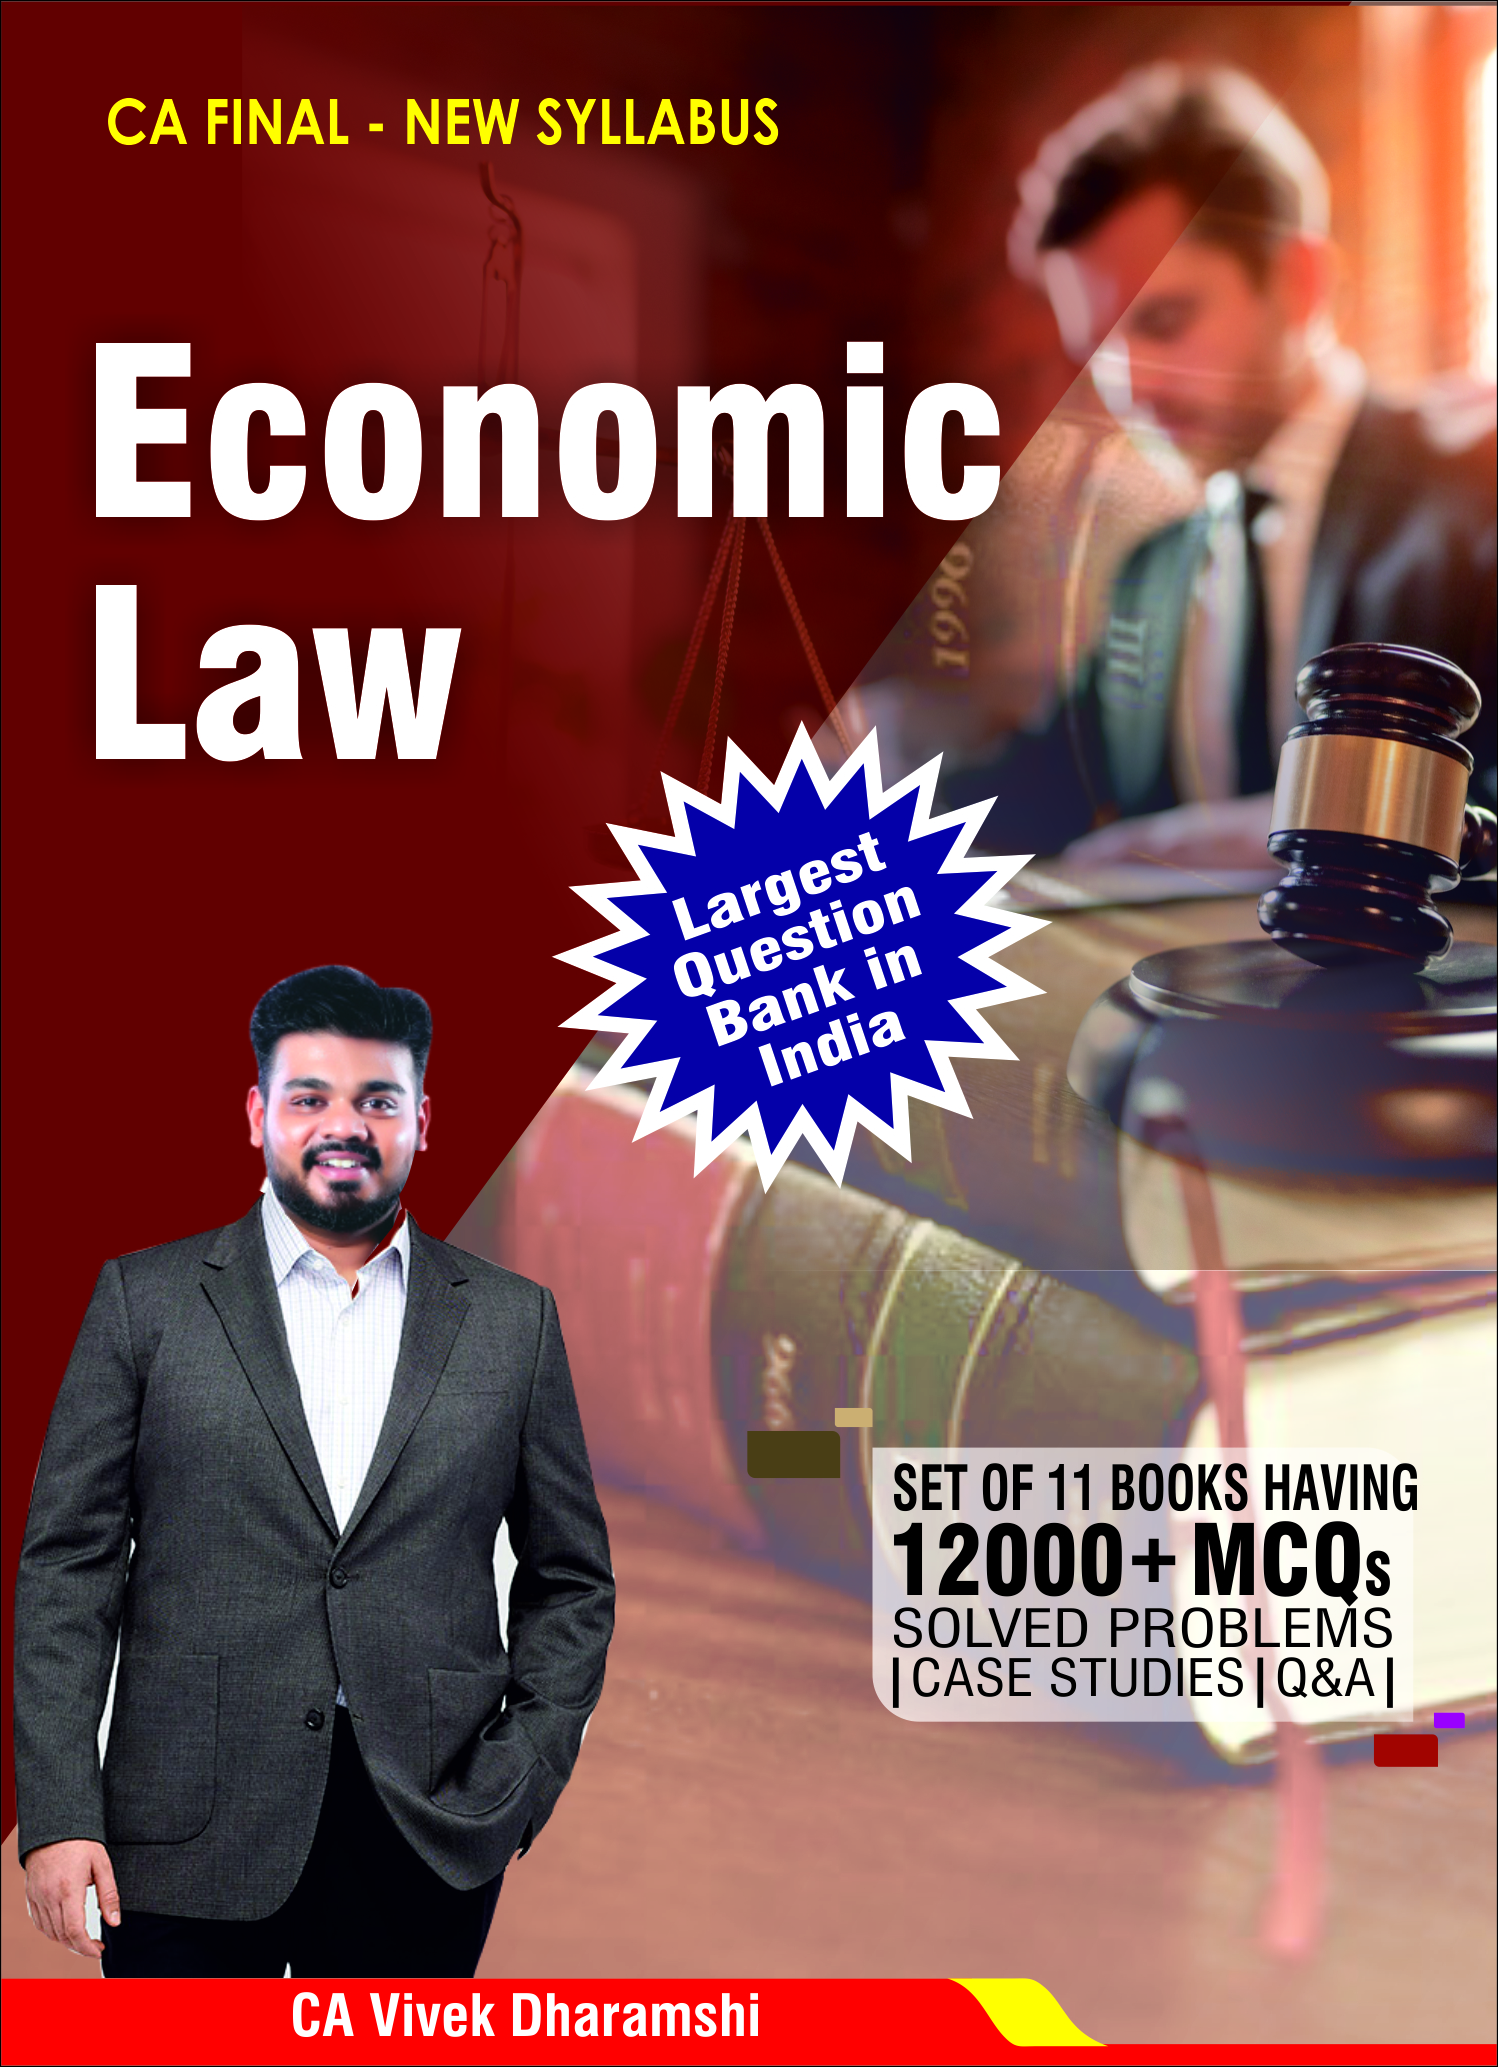 CA_Final_Corporate_and_Economic_Laws_|_Largest_Question_Bank_in_India_|_Solved_Problems_andd_Case_Studies_QanddA